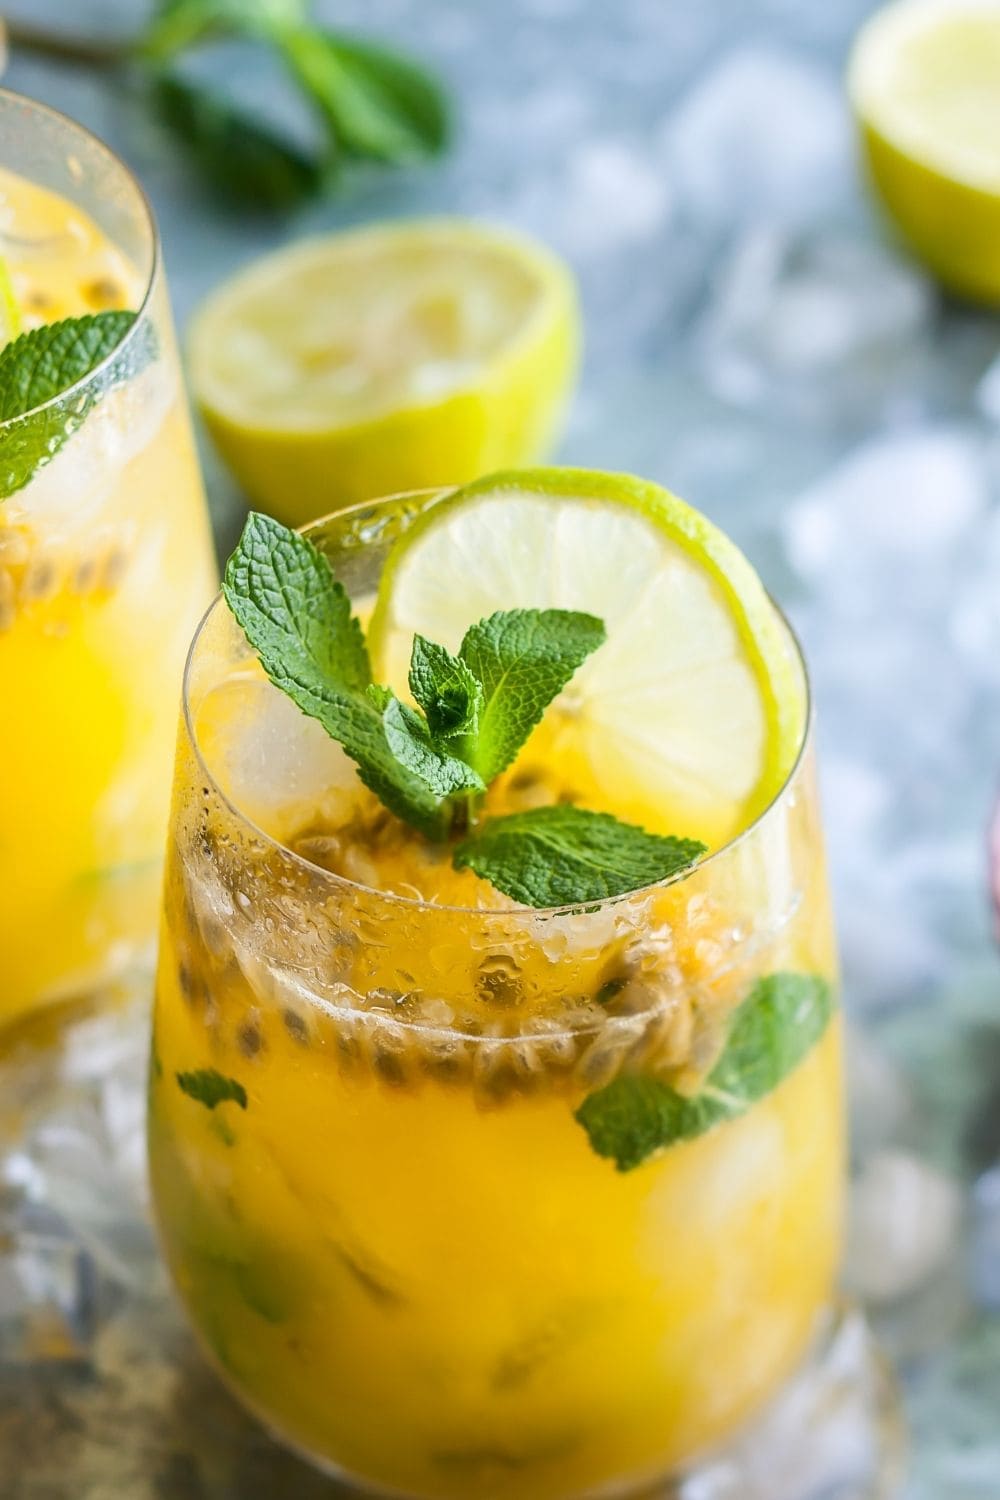 Cold Passion Fruit Juice with Mint